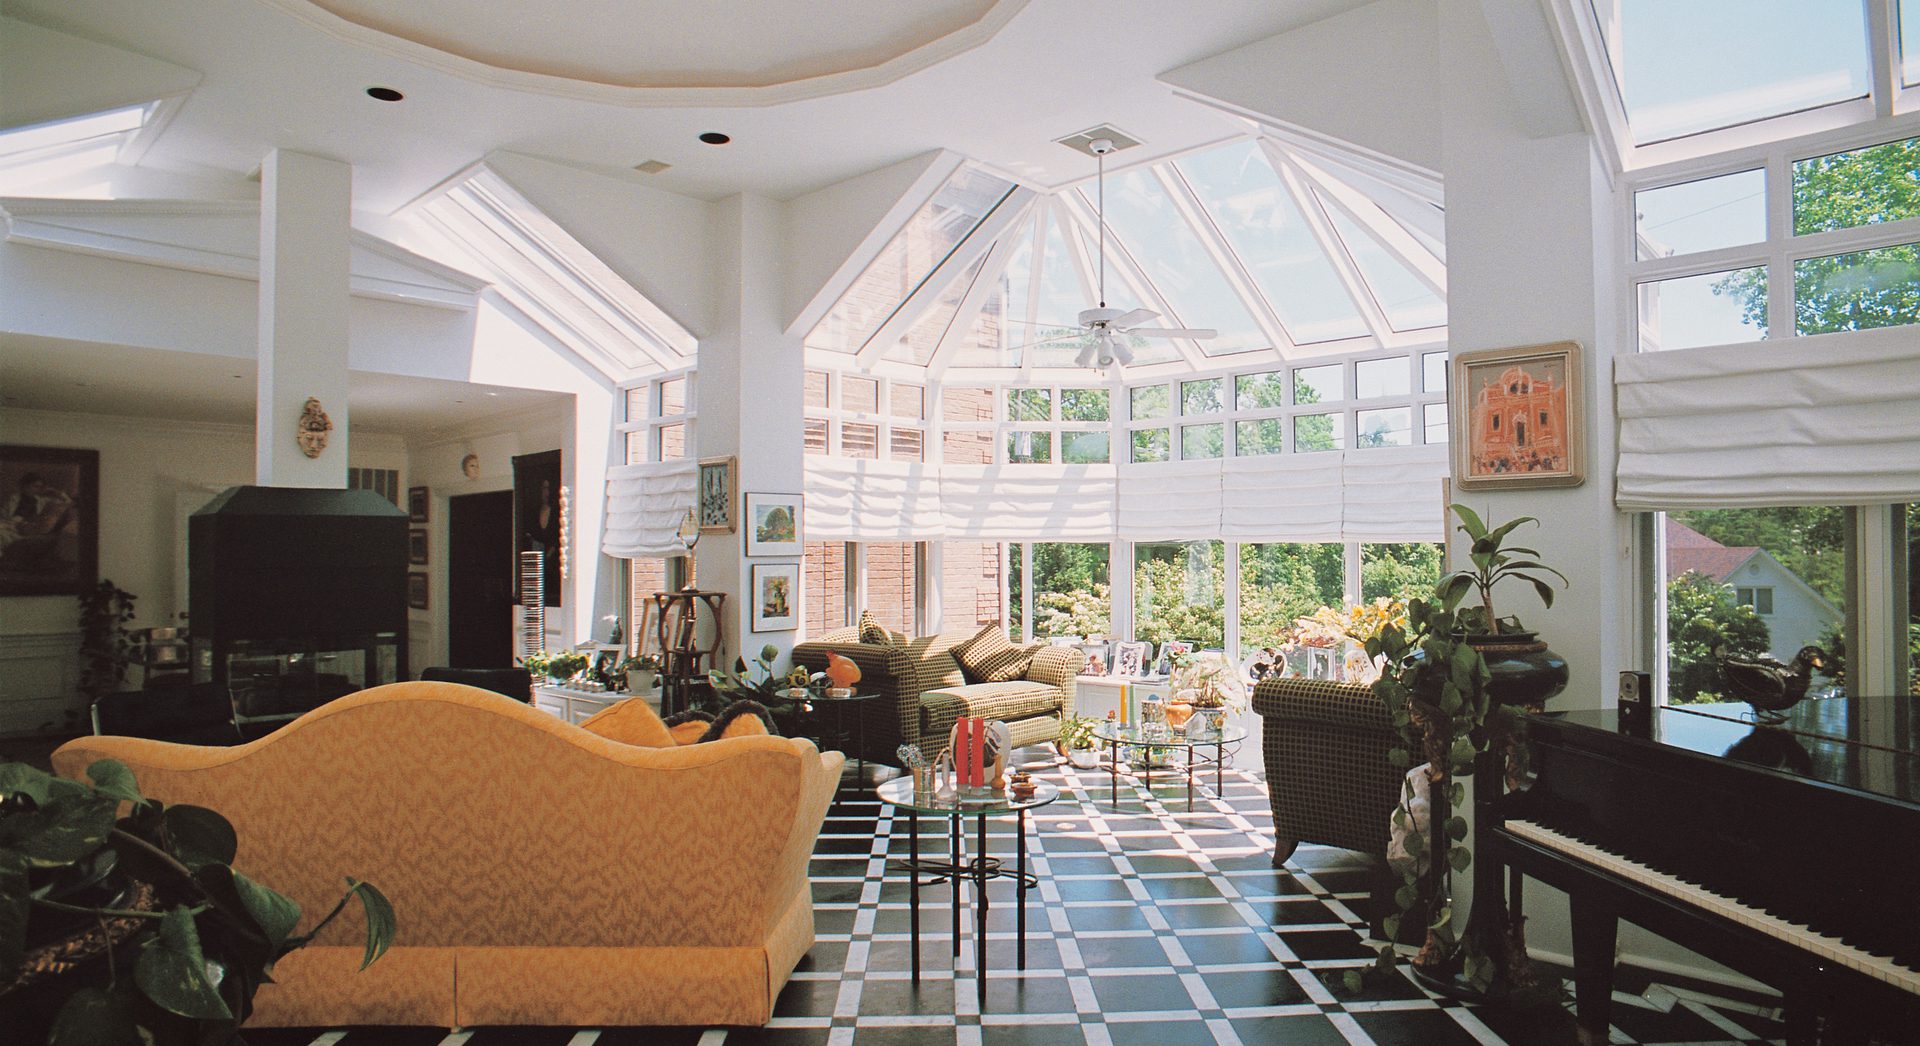 A living room with a large glass ceiling and a lot of windows.